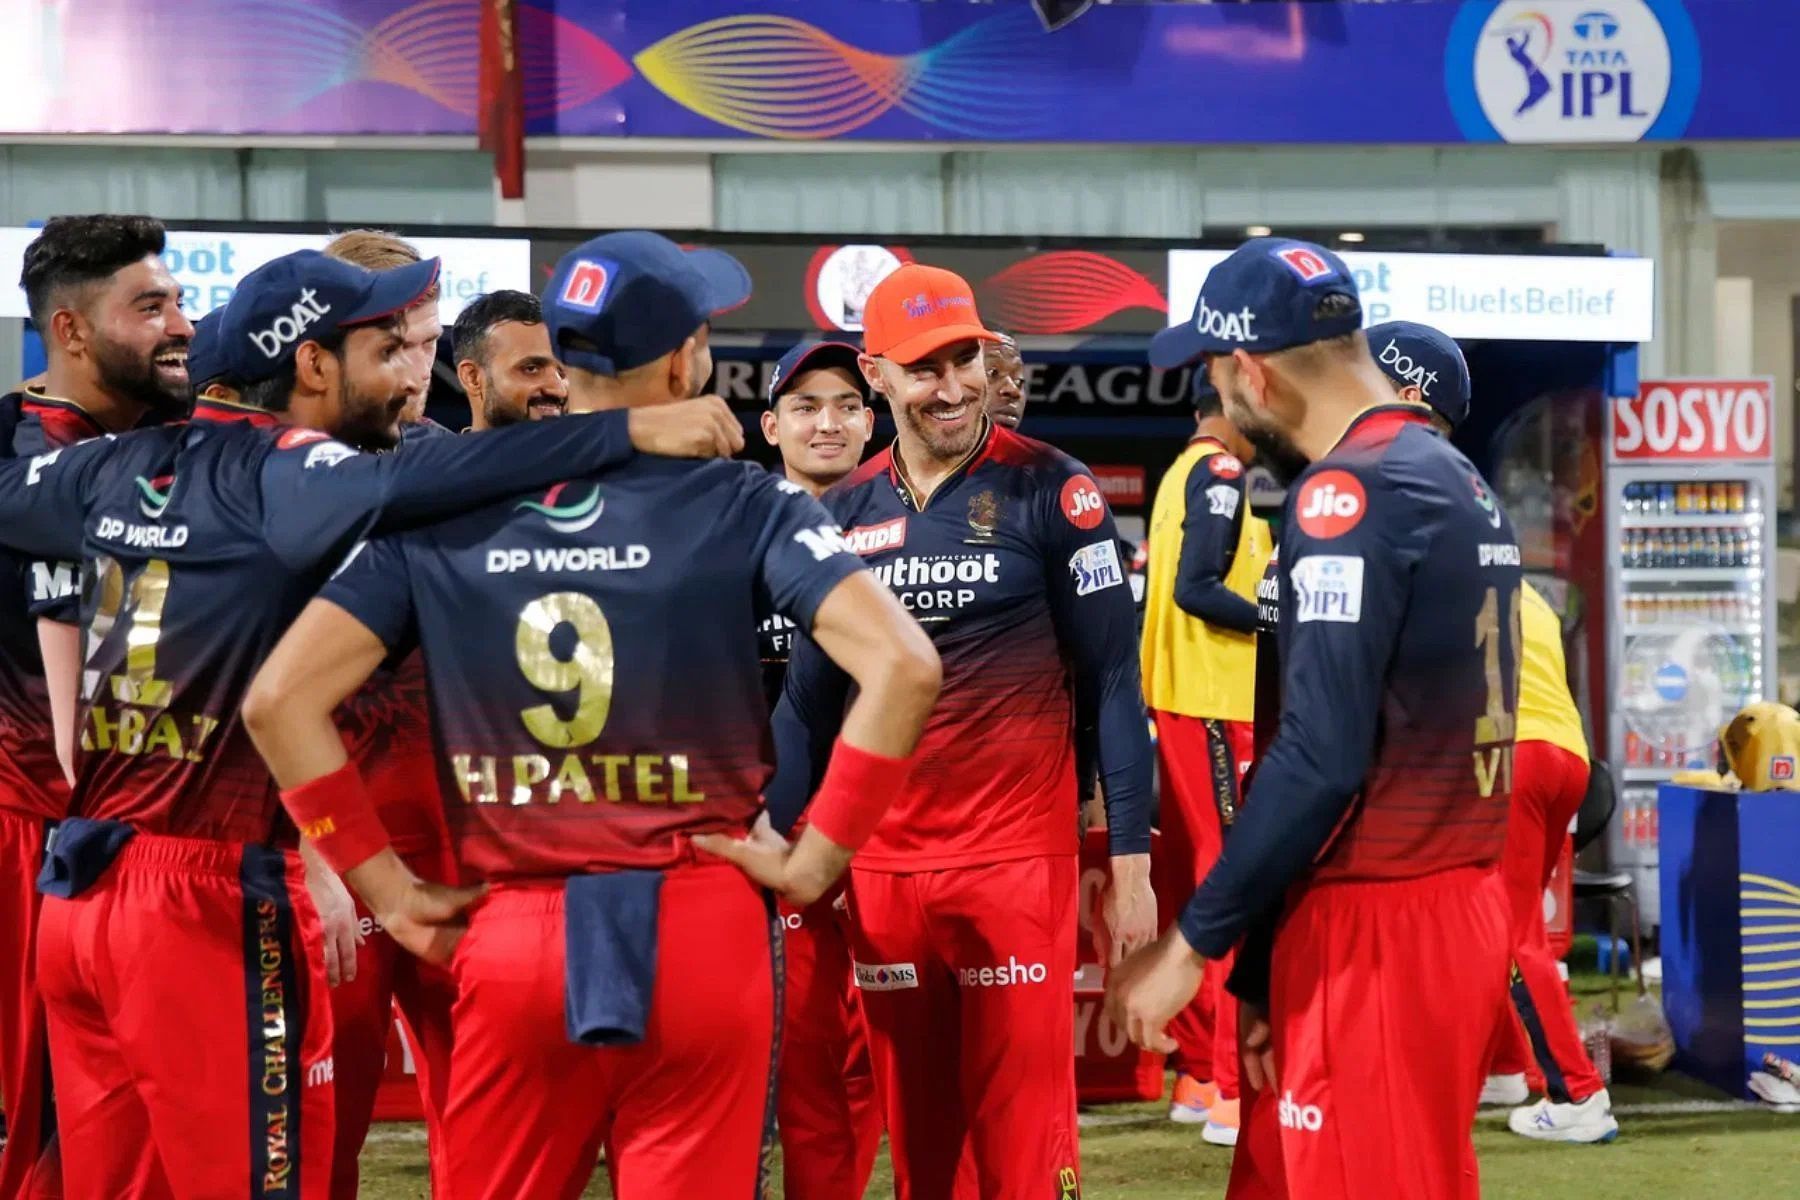 The Royal Challengers Bangalore have won 12 of the 30 IPL games they have played against the Mumbai Indians. [P/C: iplt20.com]